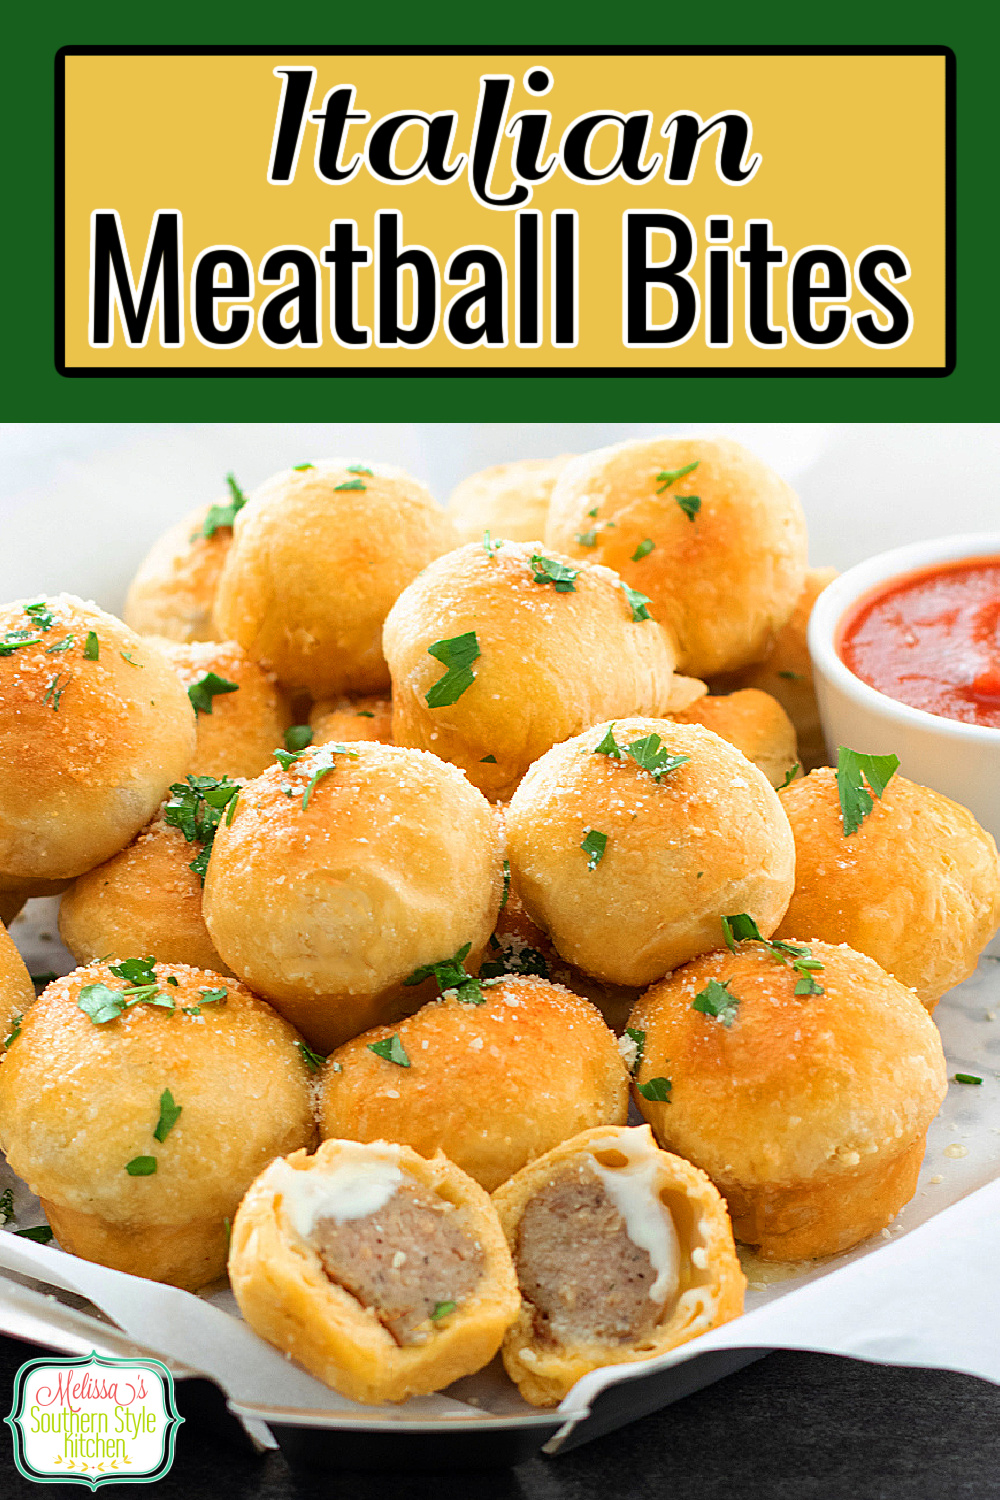 These two-bite biscuit wrapped Italian Meatball Bites are served with warm marinara sauce or pizza sauce for dipping #italianmeatballs #italianmealtballbites #meatballbites #biscuitbites #cannedbiscuitrecipes #cannedbiscuits #meatballrecipes via @melissasssk